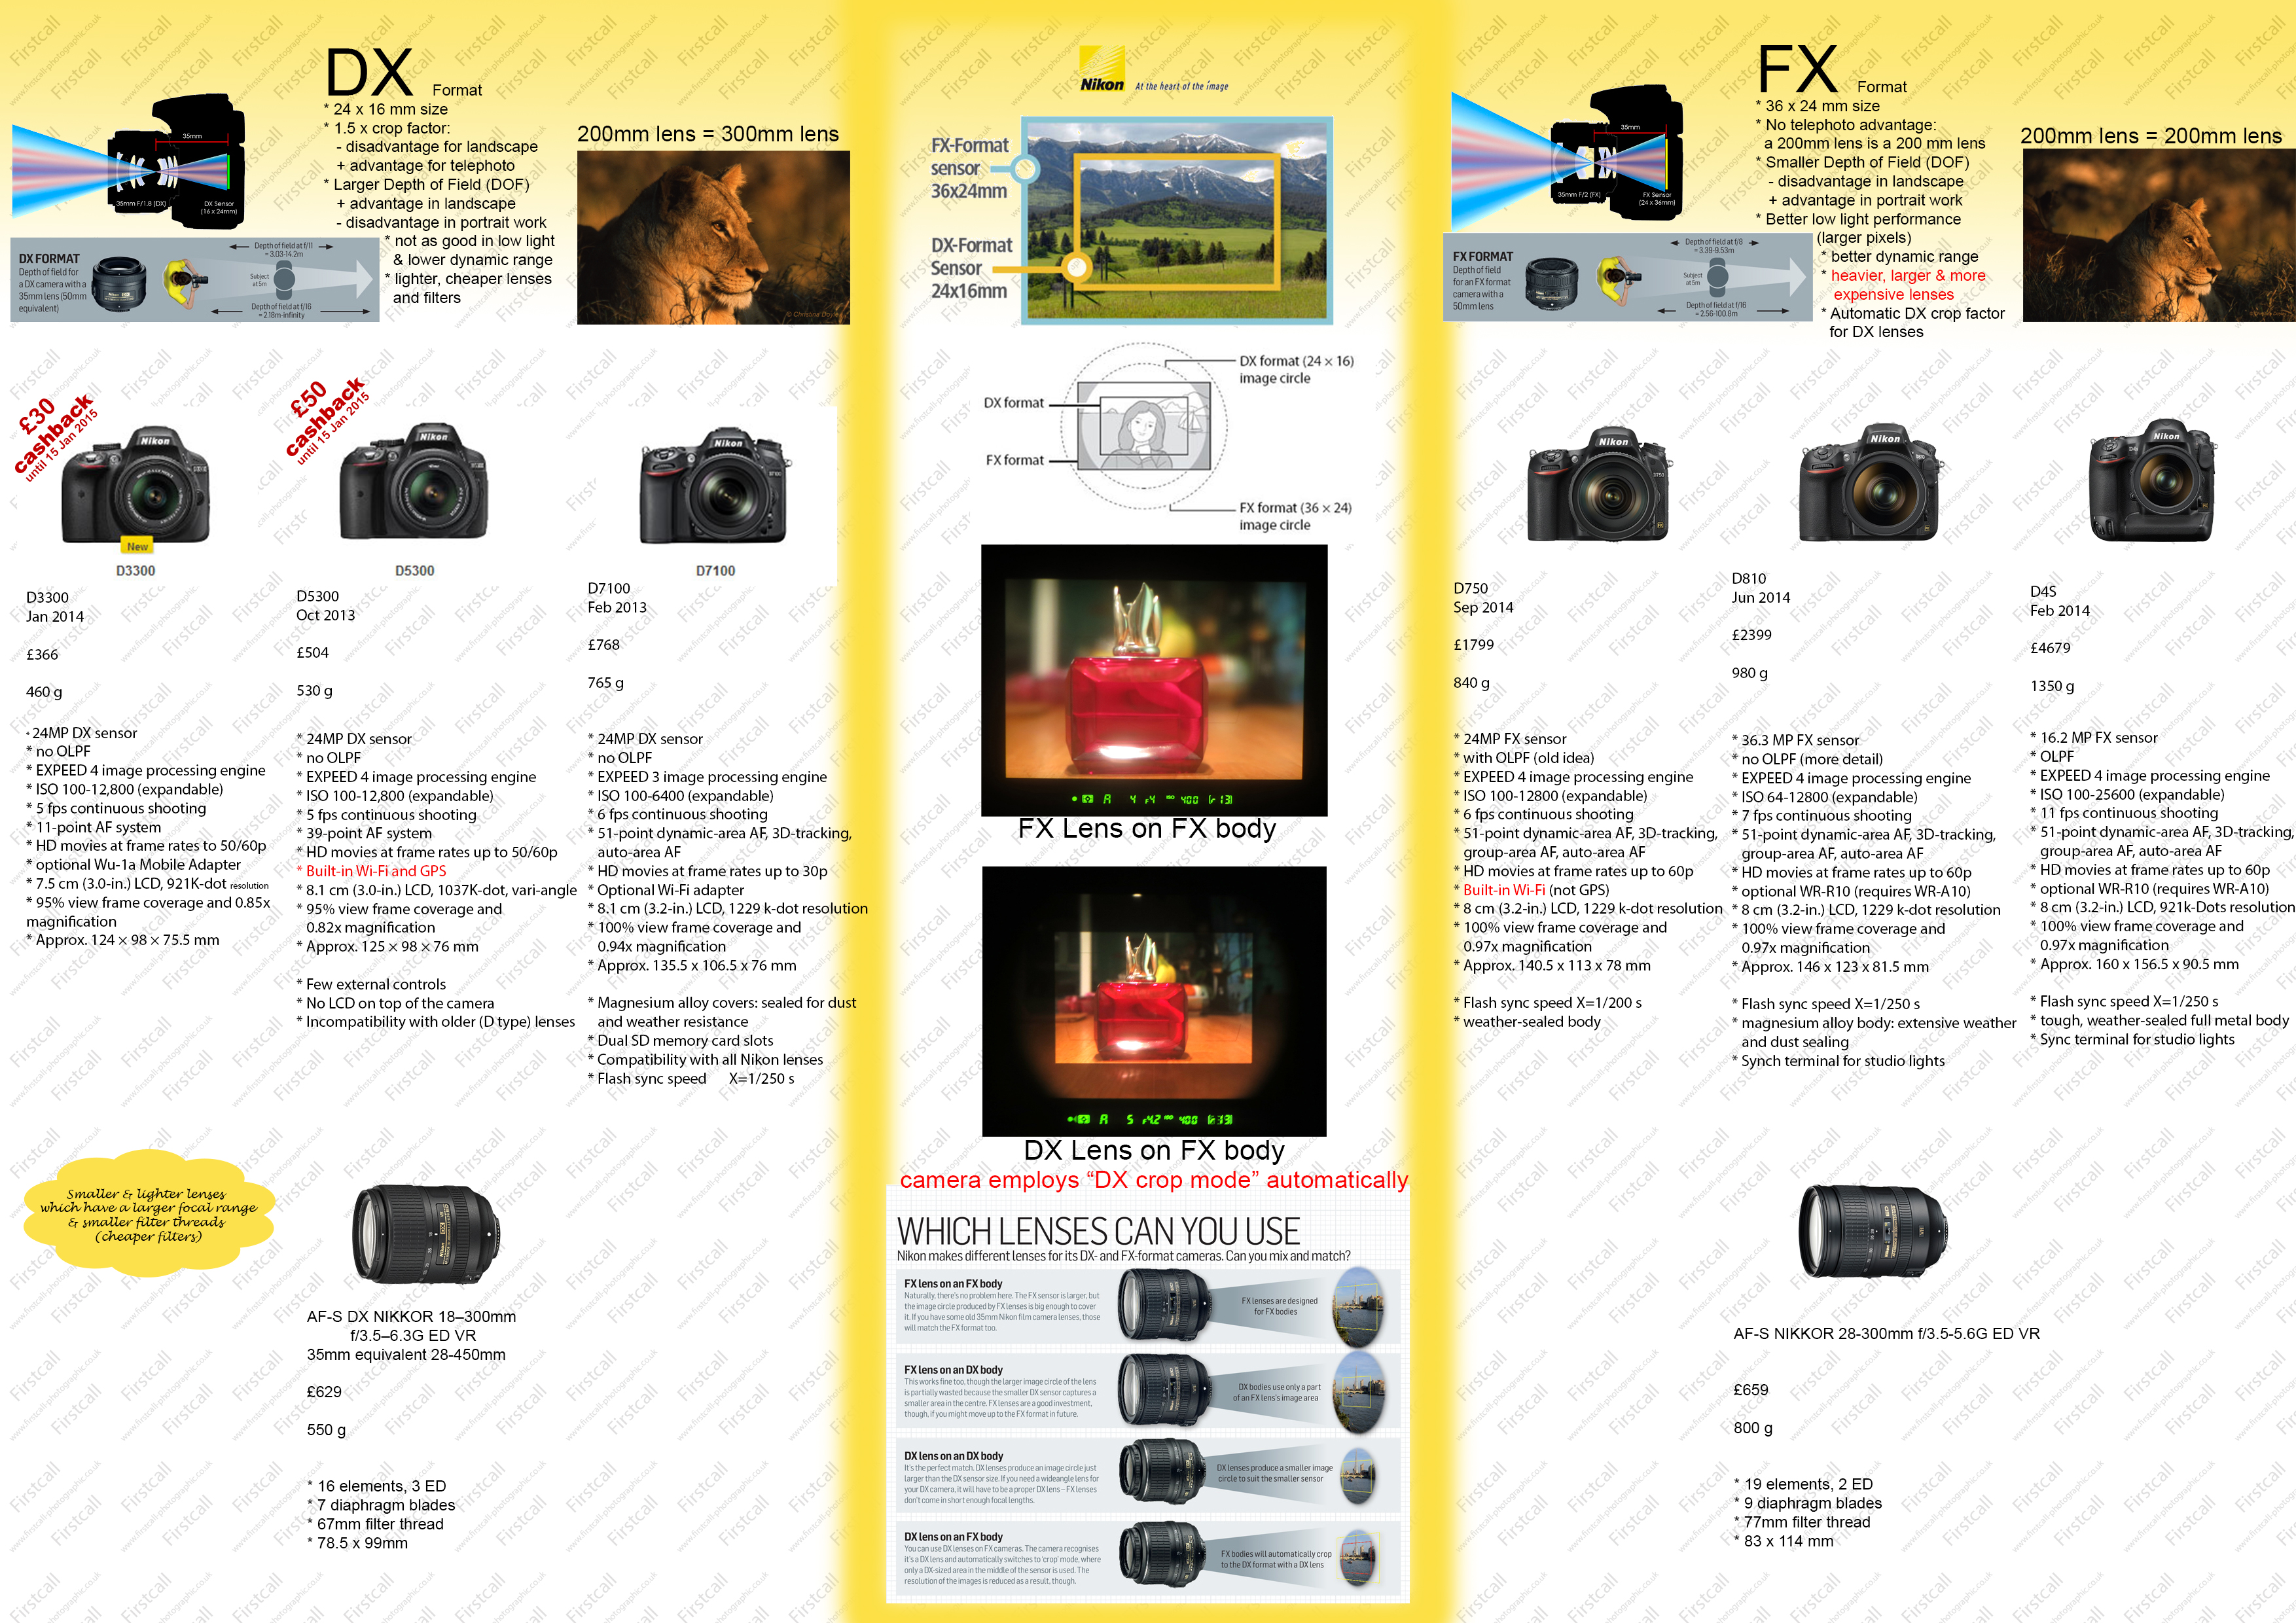 making the choice between a nikon dx versus fx